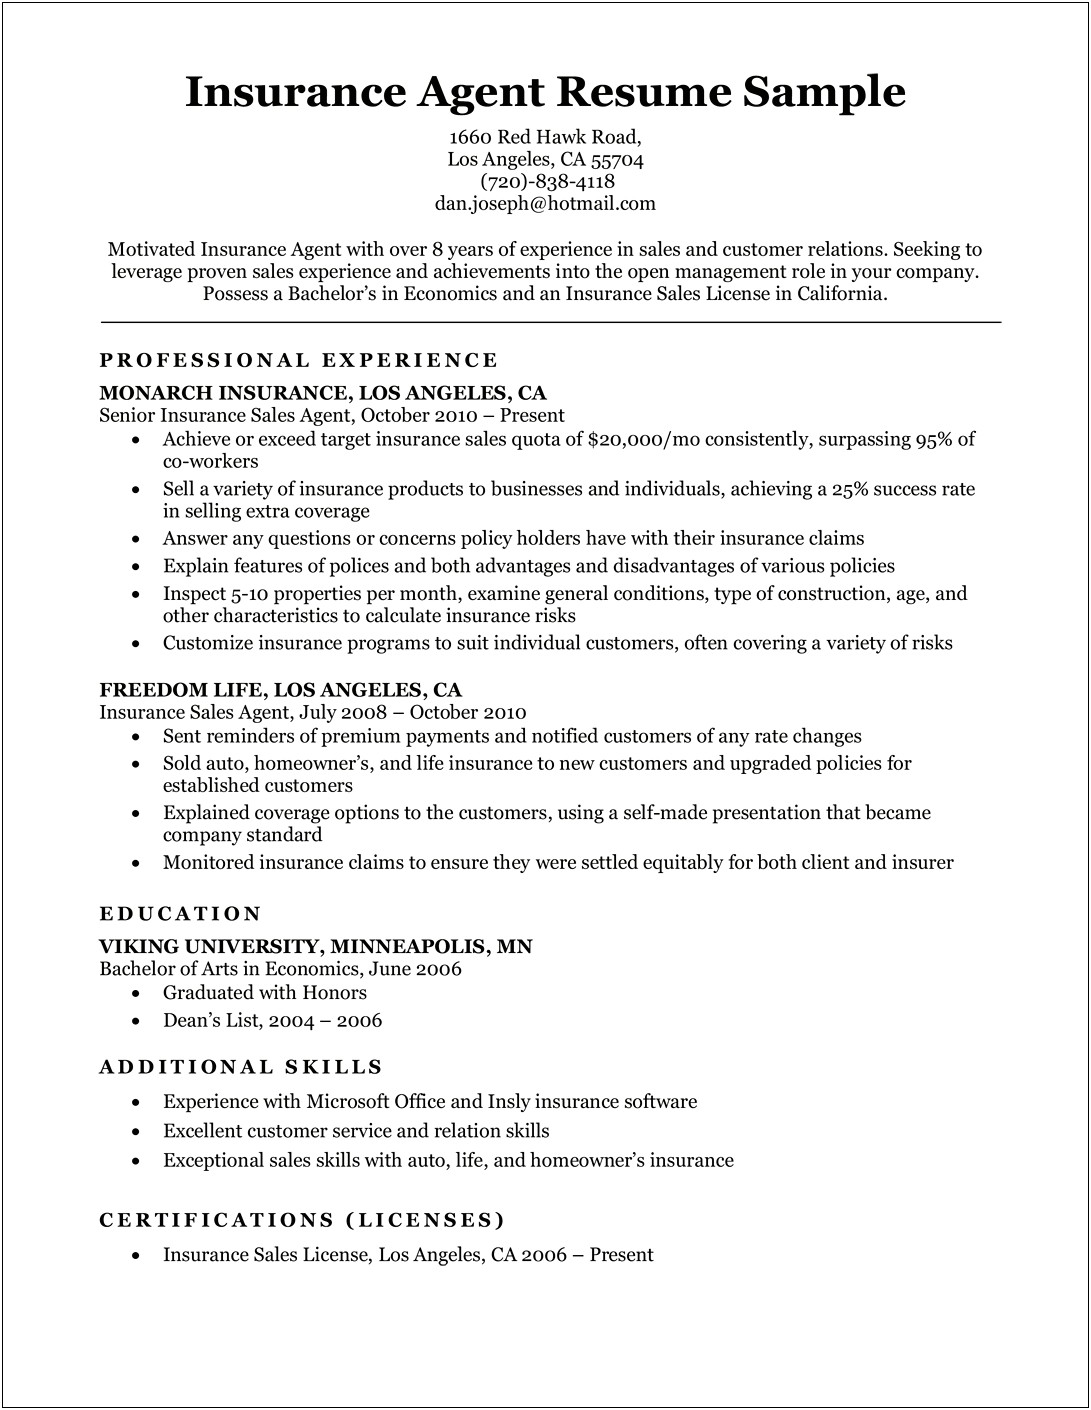 Experience Section In Resume Example